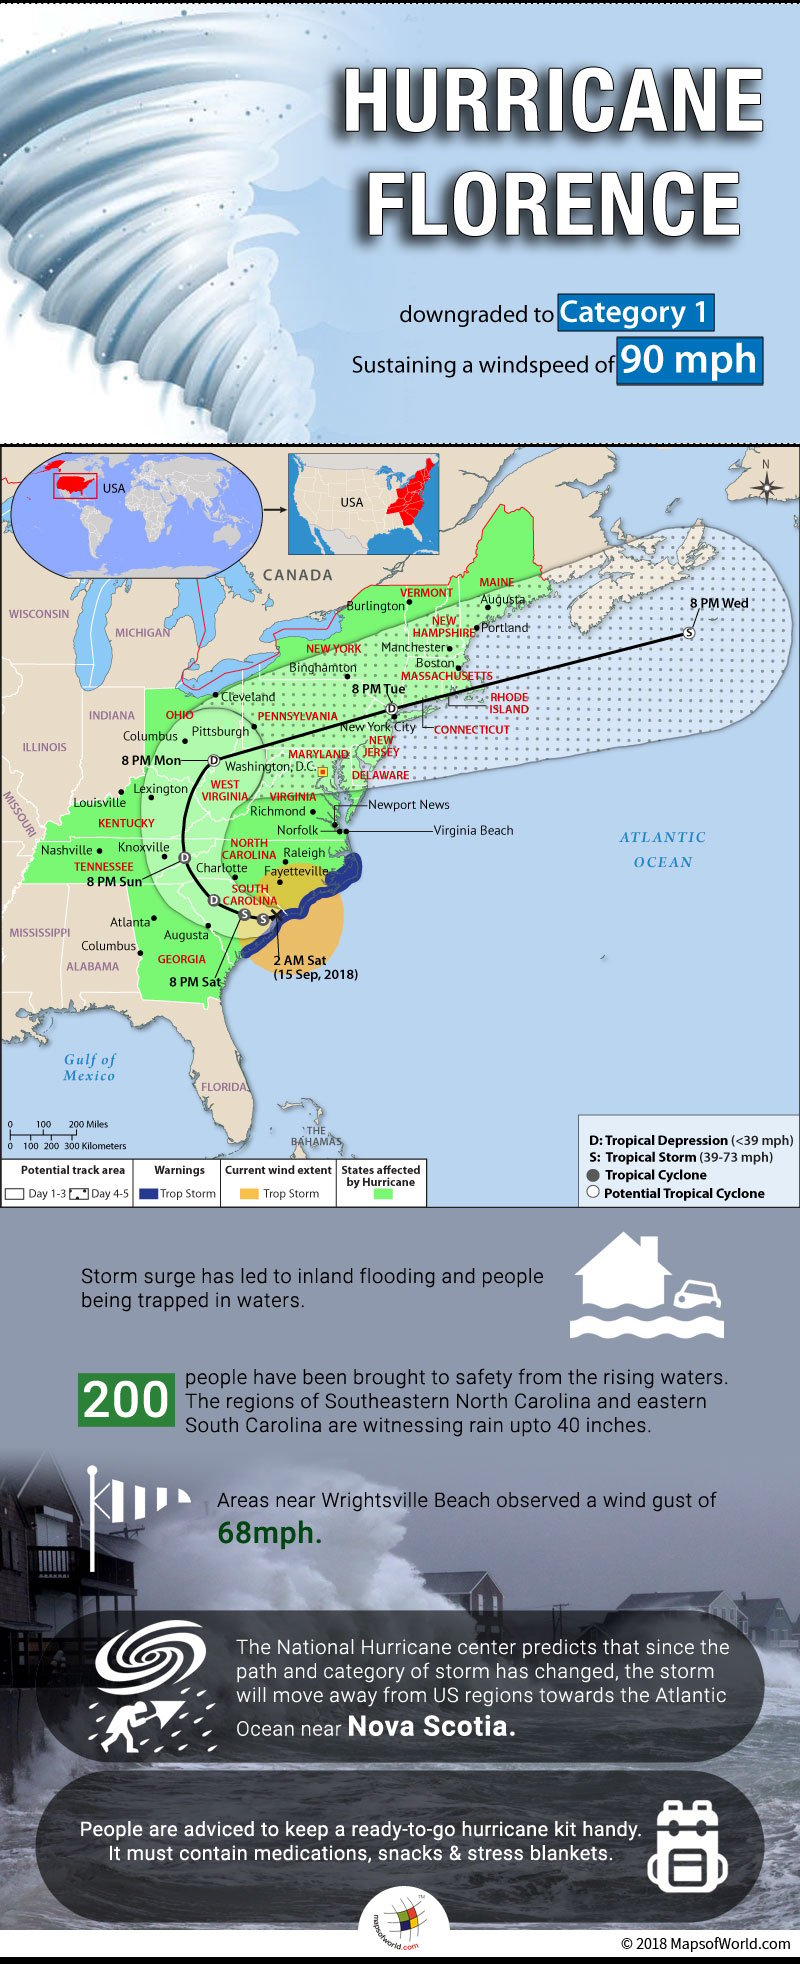 Infographic elaborating US states affected by Hurricane Florence